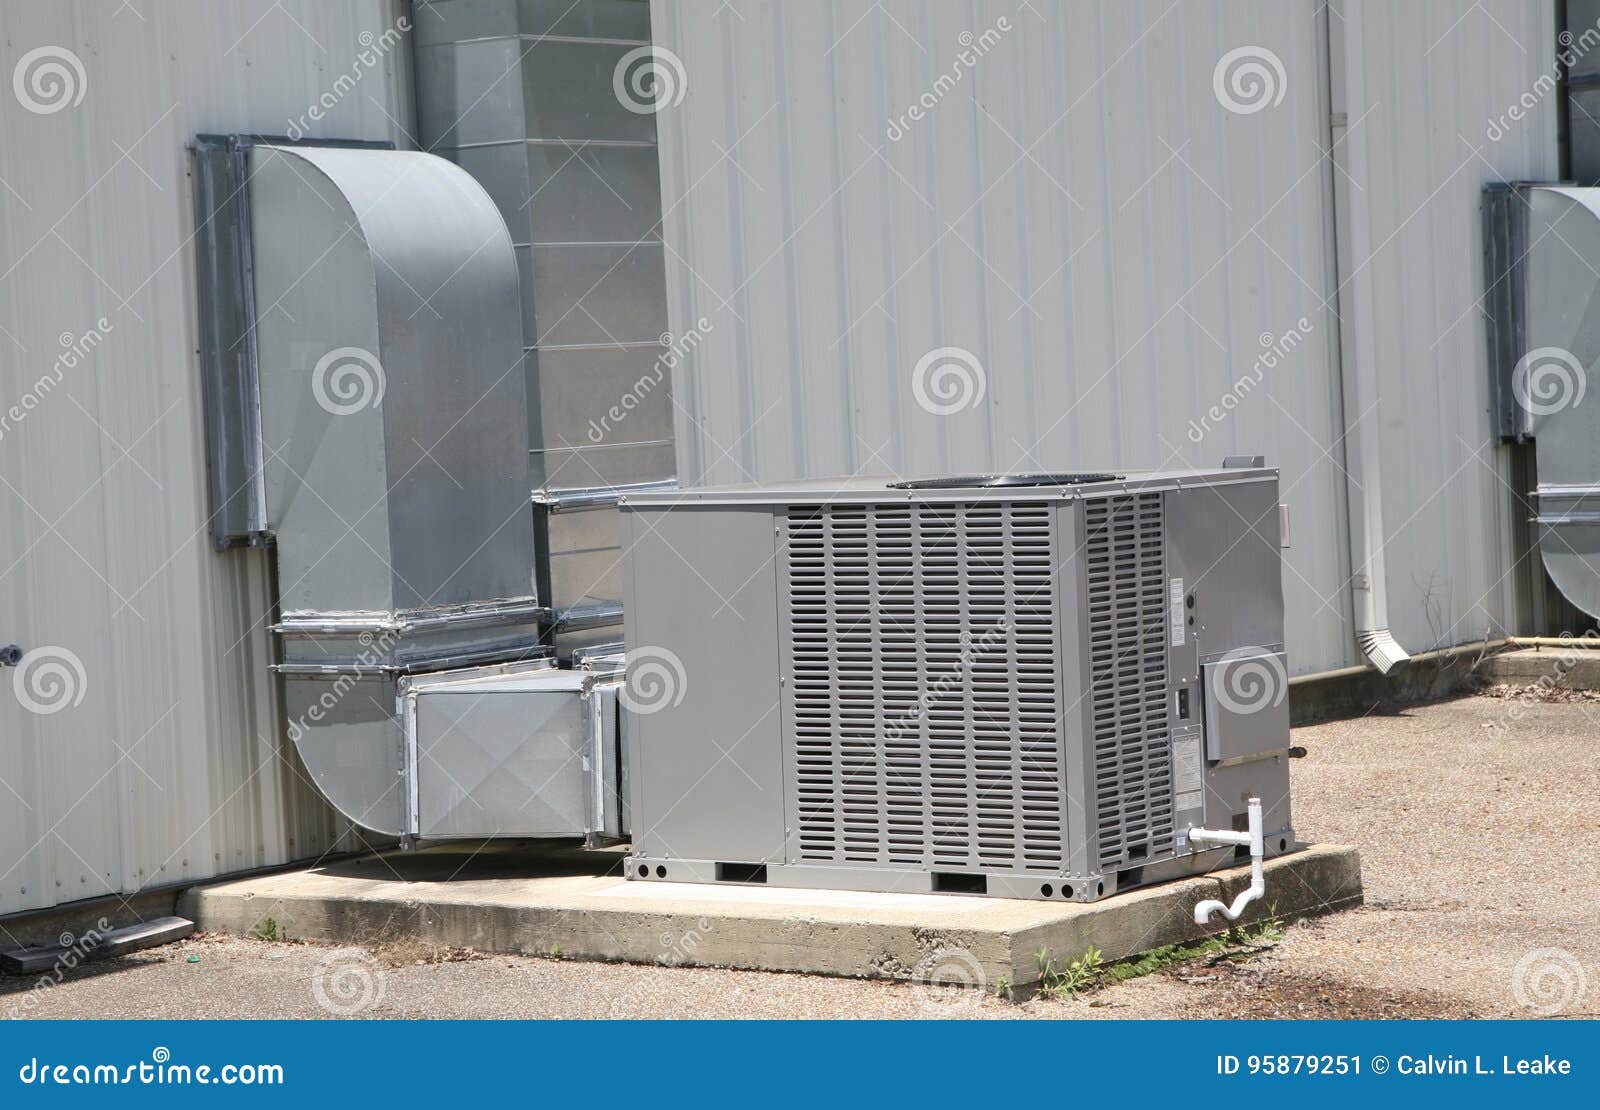 commercial air handling unit